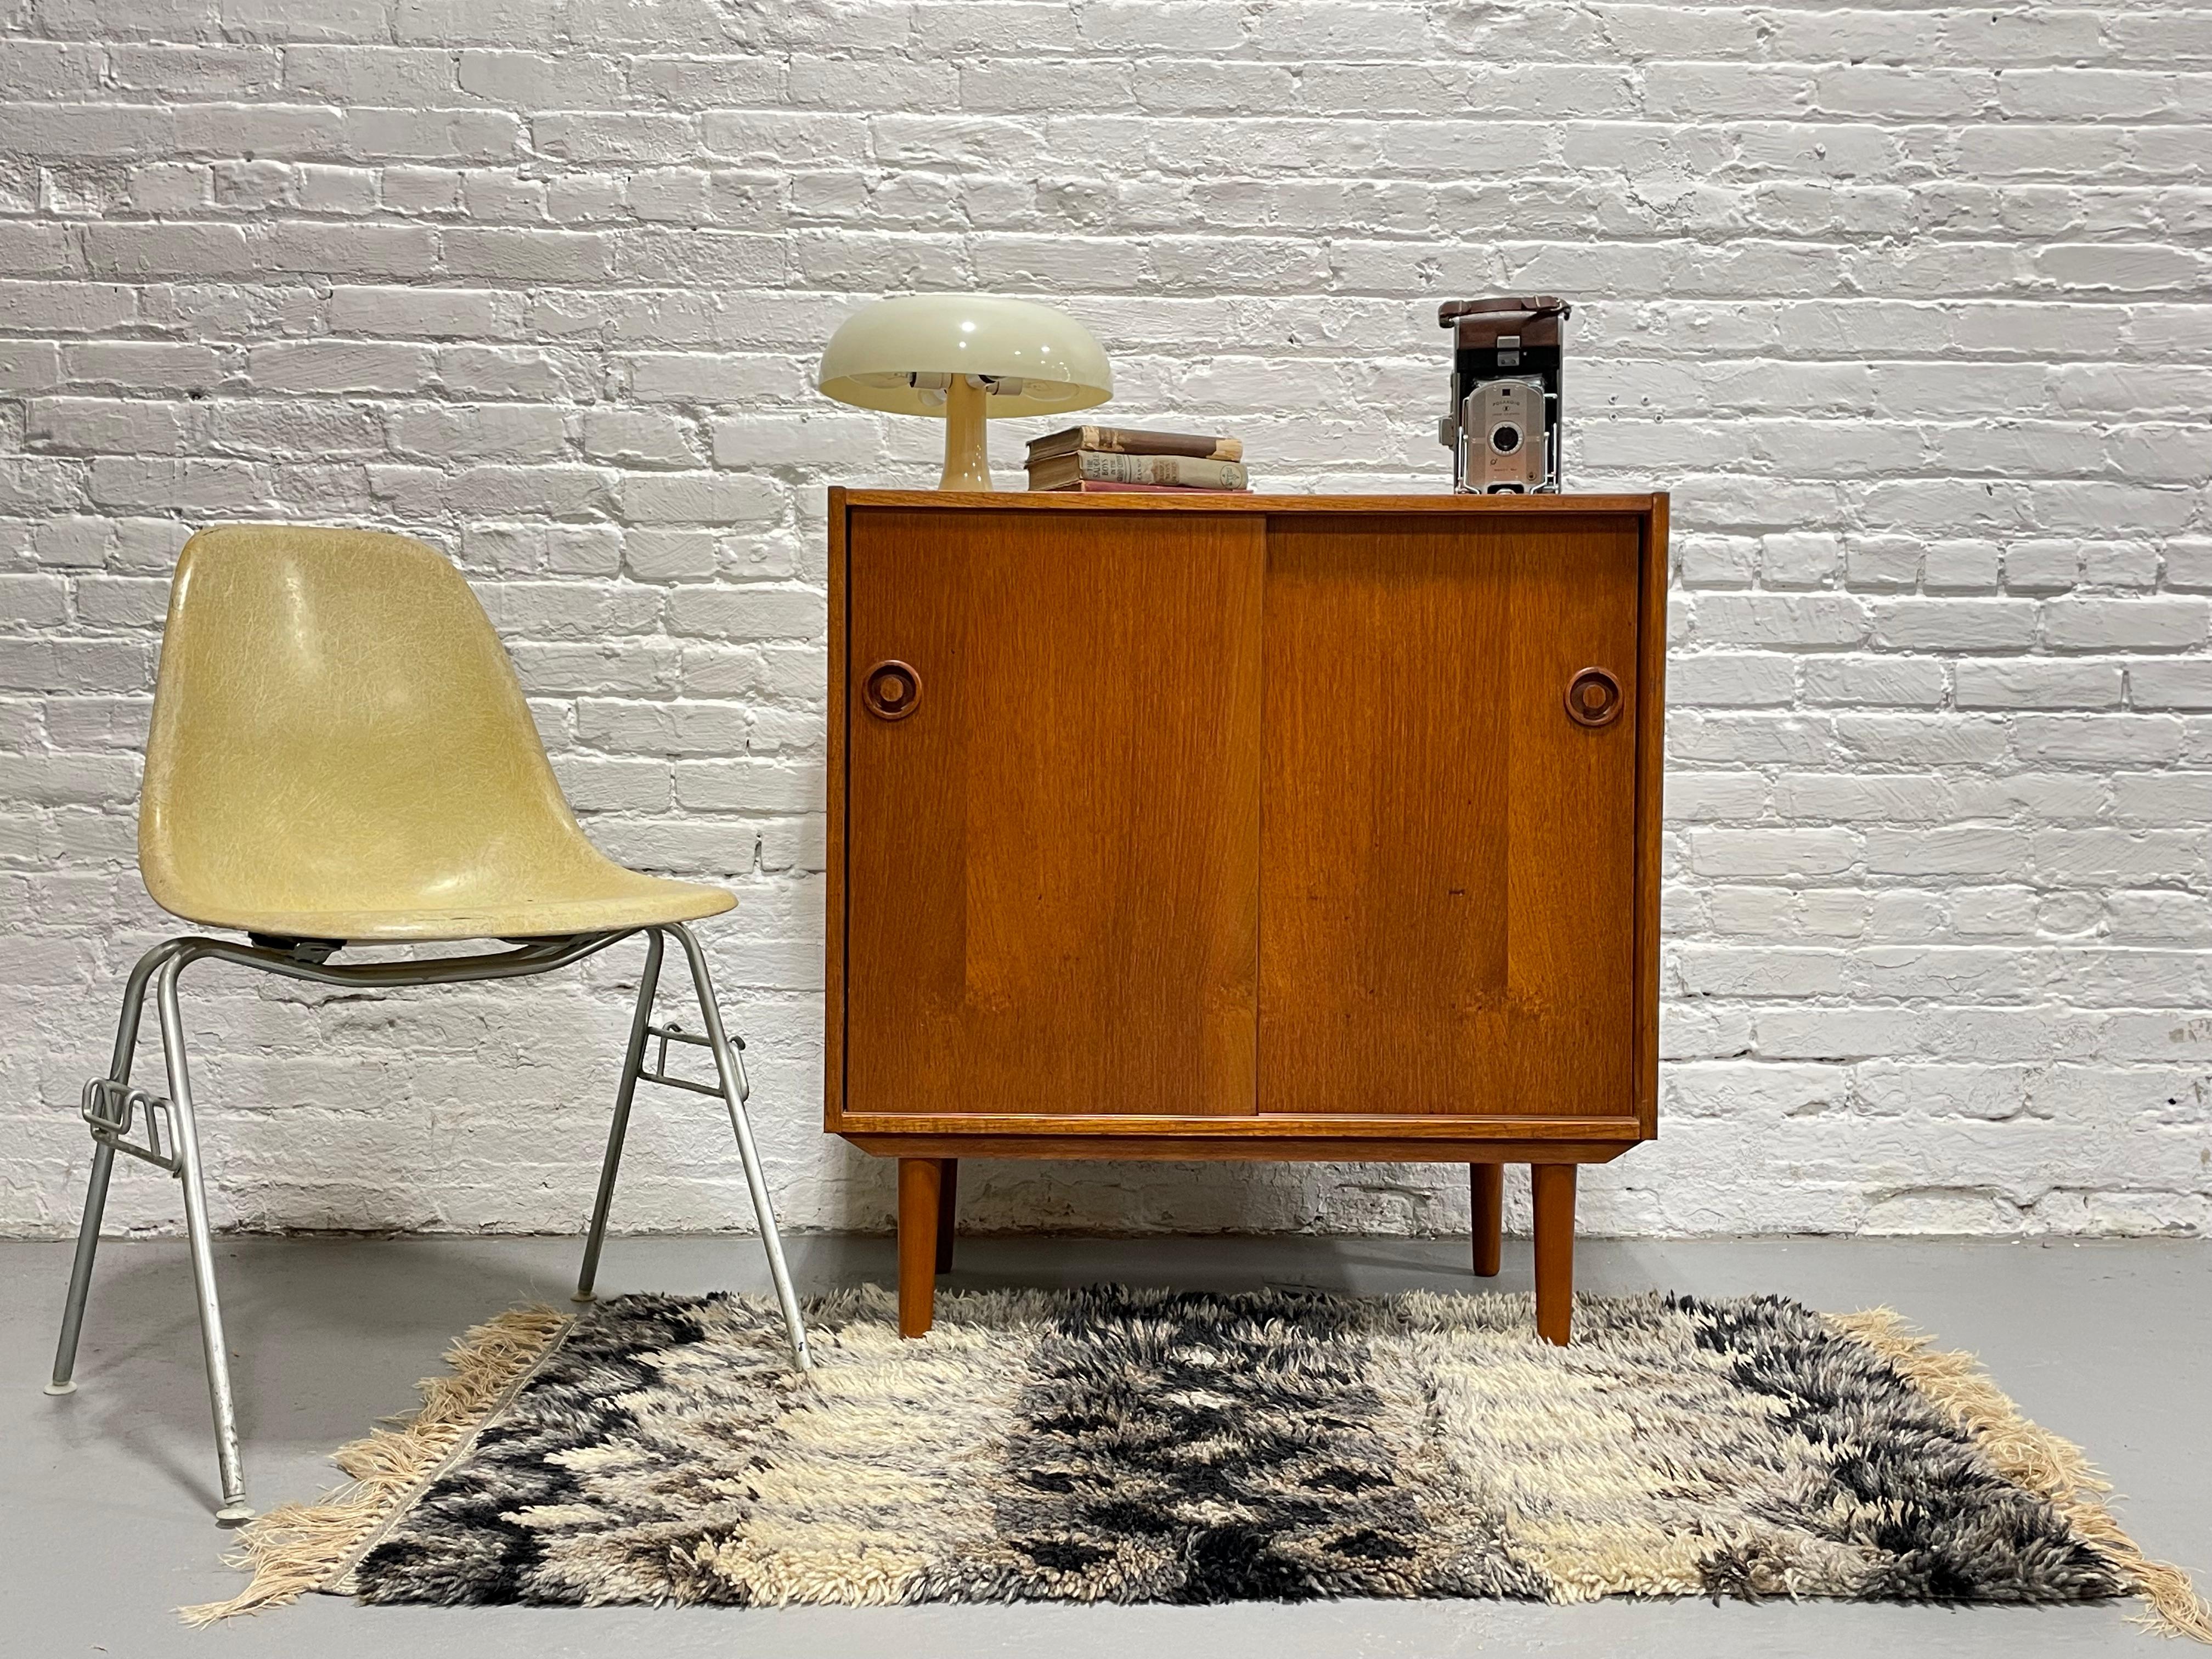 Mid Century Modern Teak Jr. Credenza / Storage Cabinet, c. 1960's.  While small and streamlined, this cabinet offers a vast amount of storage space, enough for several components above and below the shelf if used as a media stand or alternatively, a